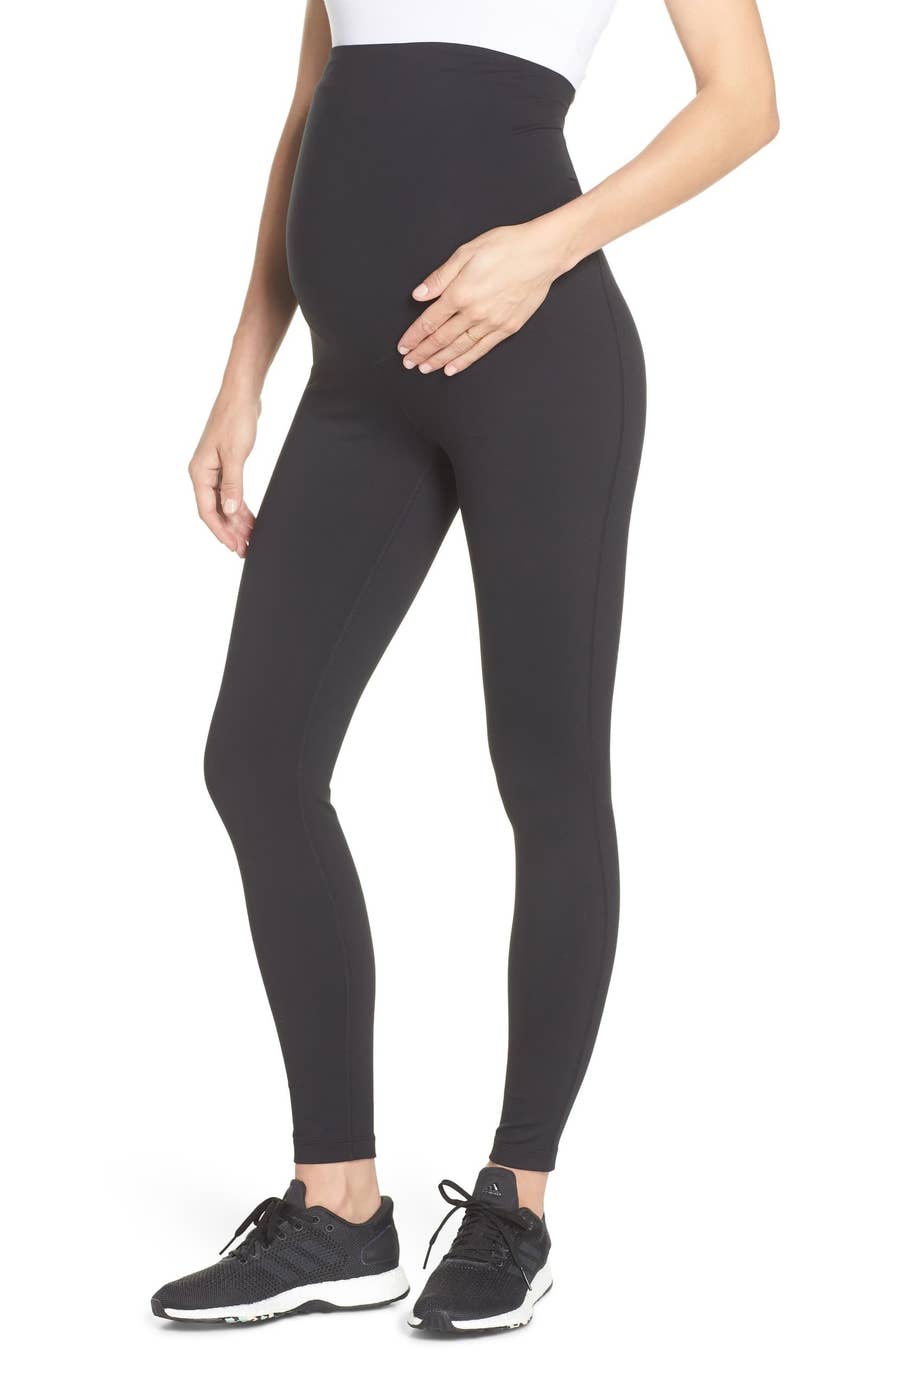 Nordstrom: Zella 'Live In' Leggings up to 40% off + FREE shipping